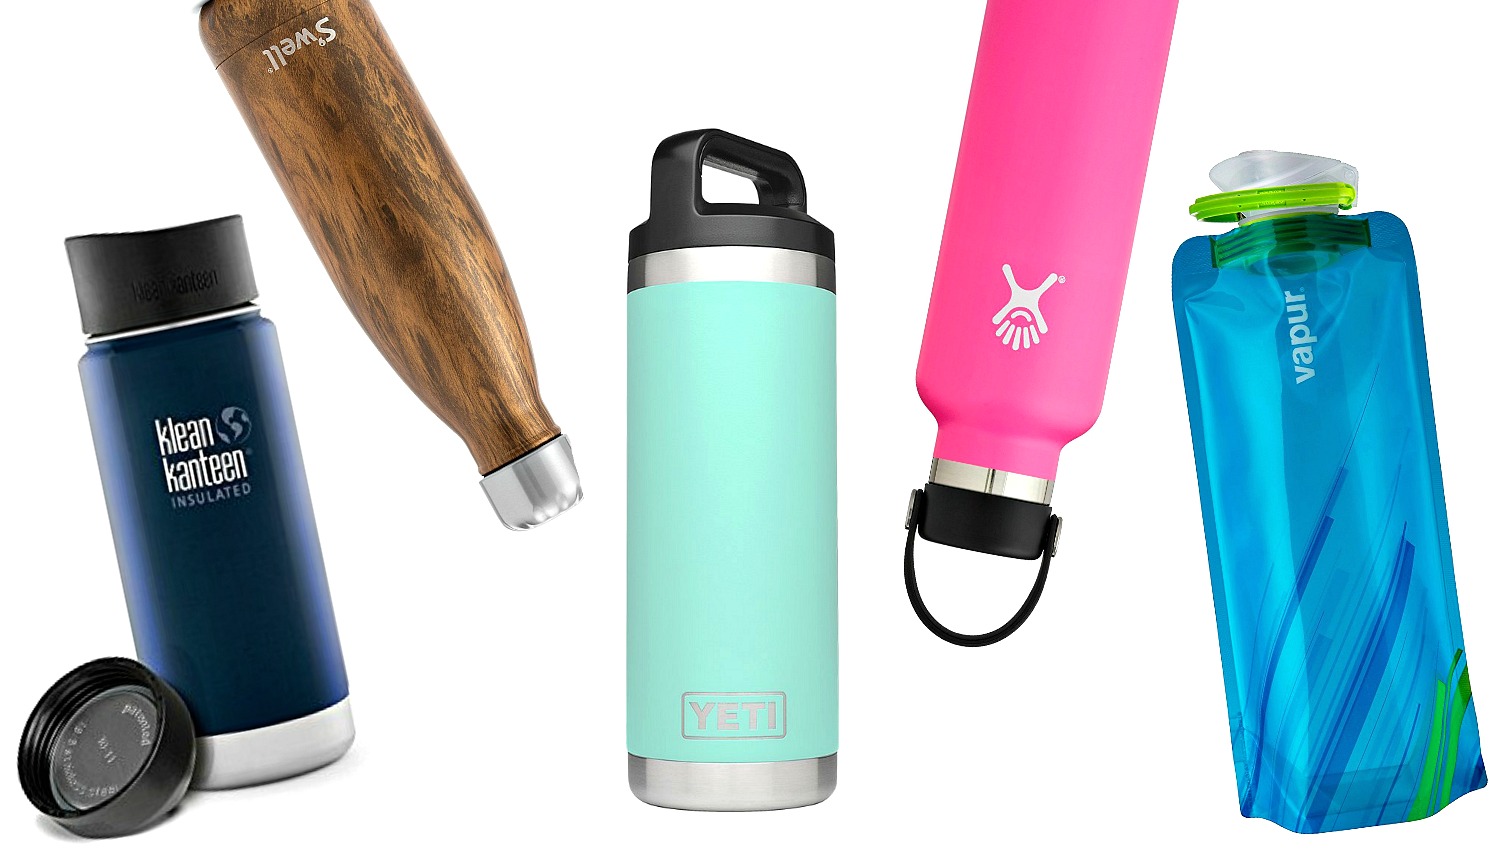 https://www.travelfashiongirl.com/wp-content/uploads/2018/06/best-thermos-and-flask-for-travel-pin.jpg